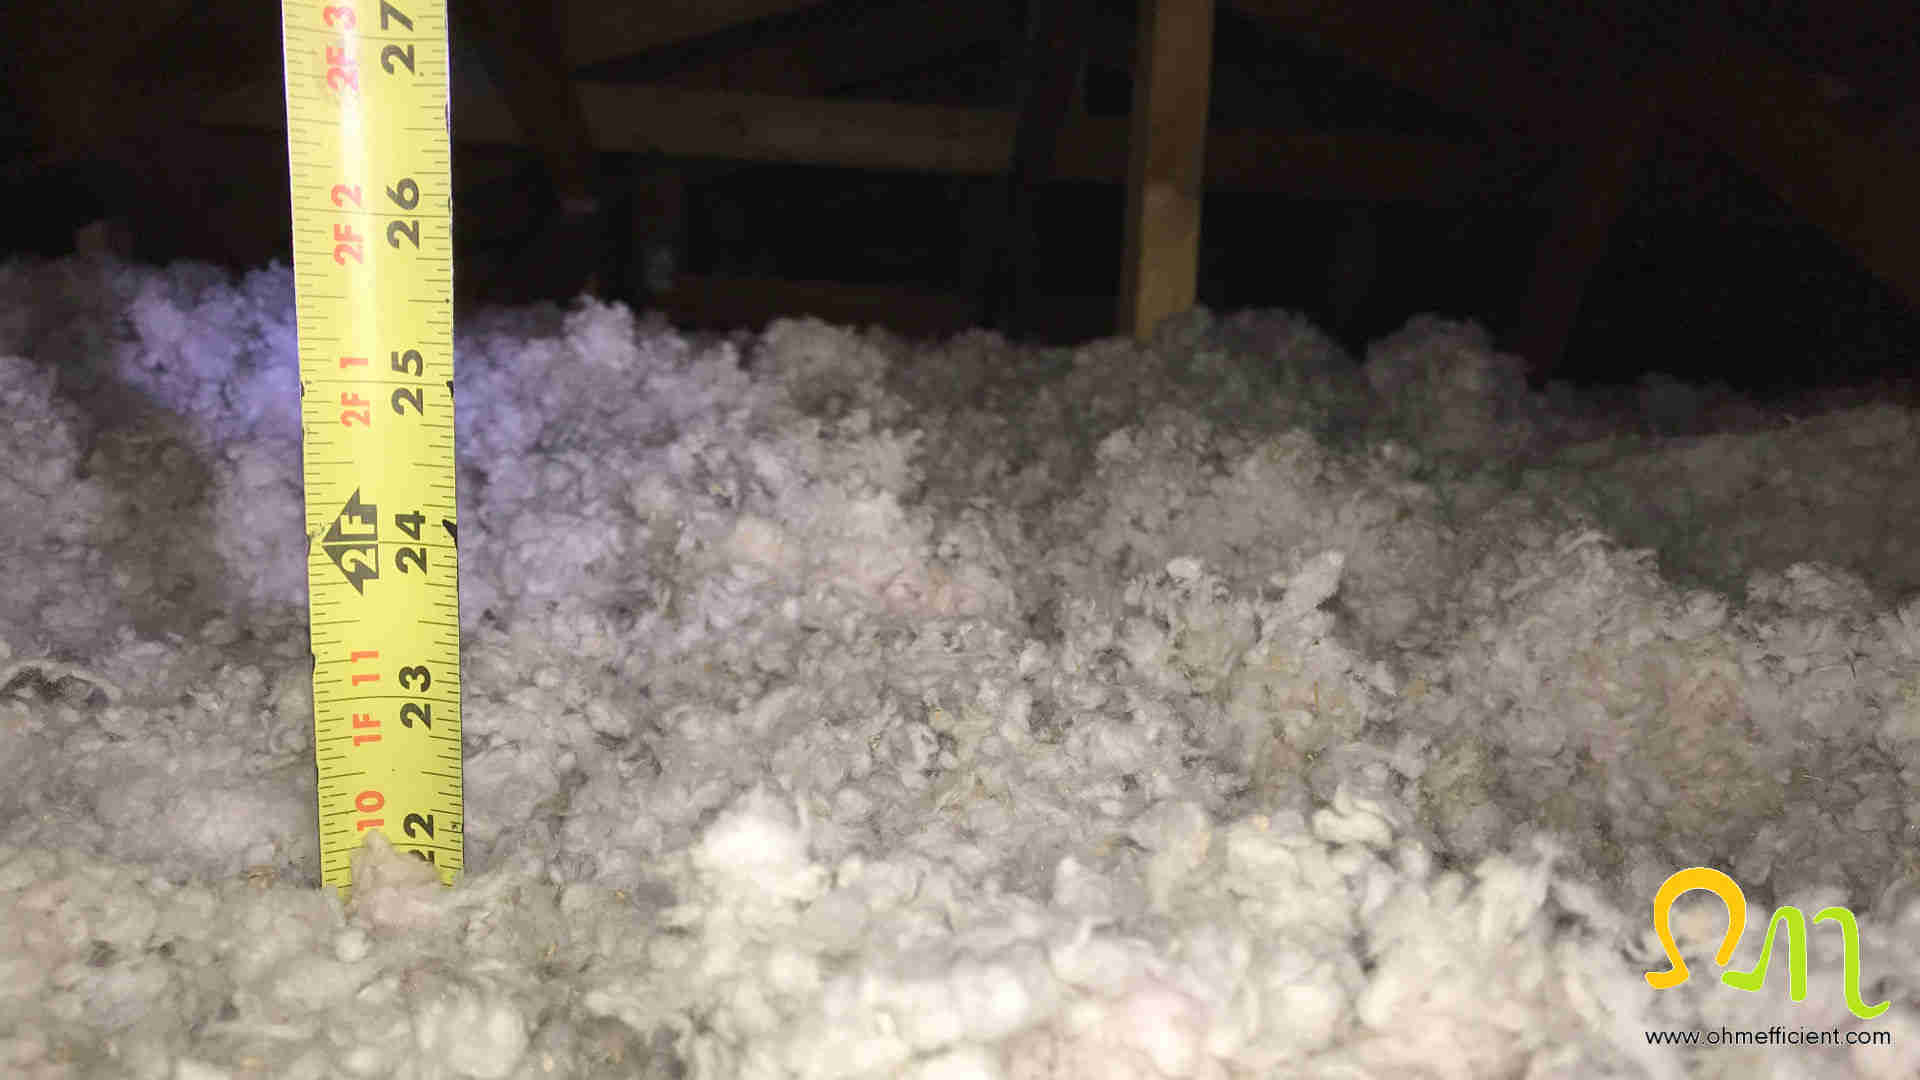 How To Calculate Blow In Insulation How to install blown-in attic insulation - OHMefficient